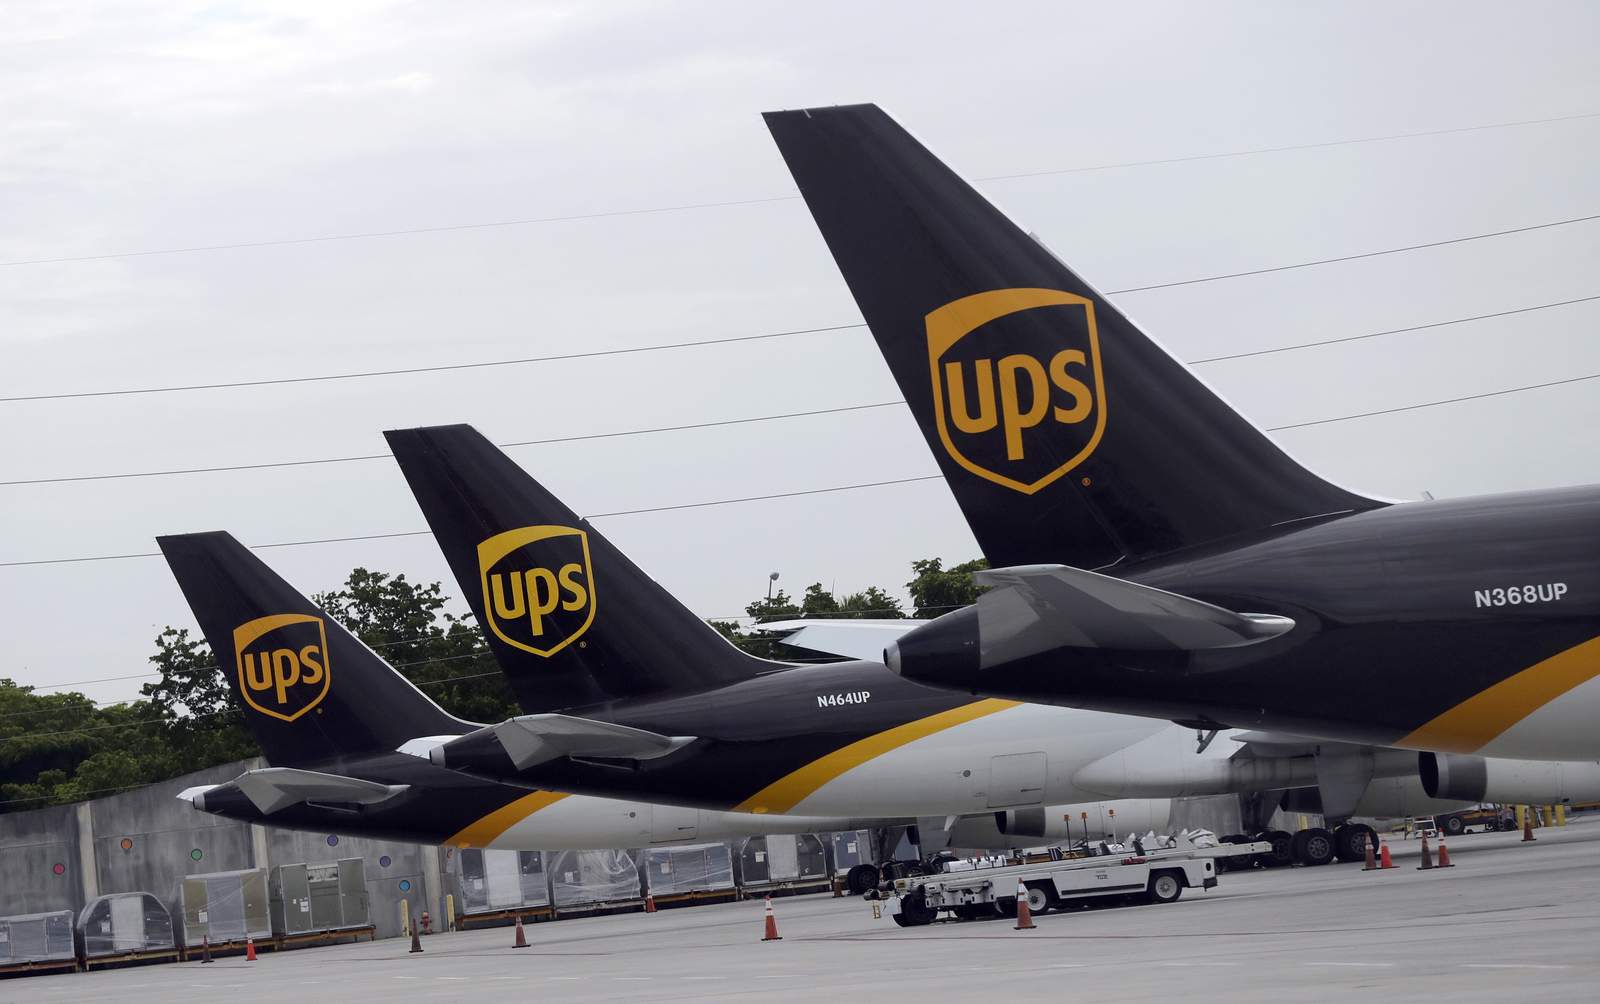 Demand for delivery boosts UPS revenue, but costs rise too